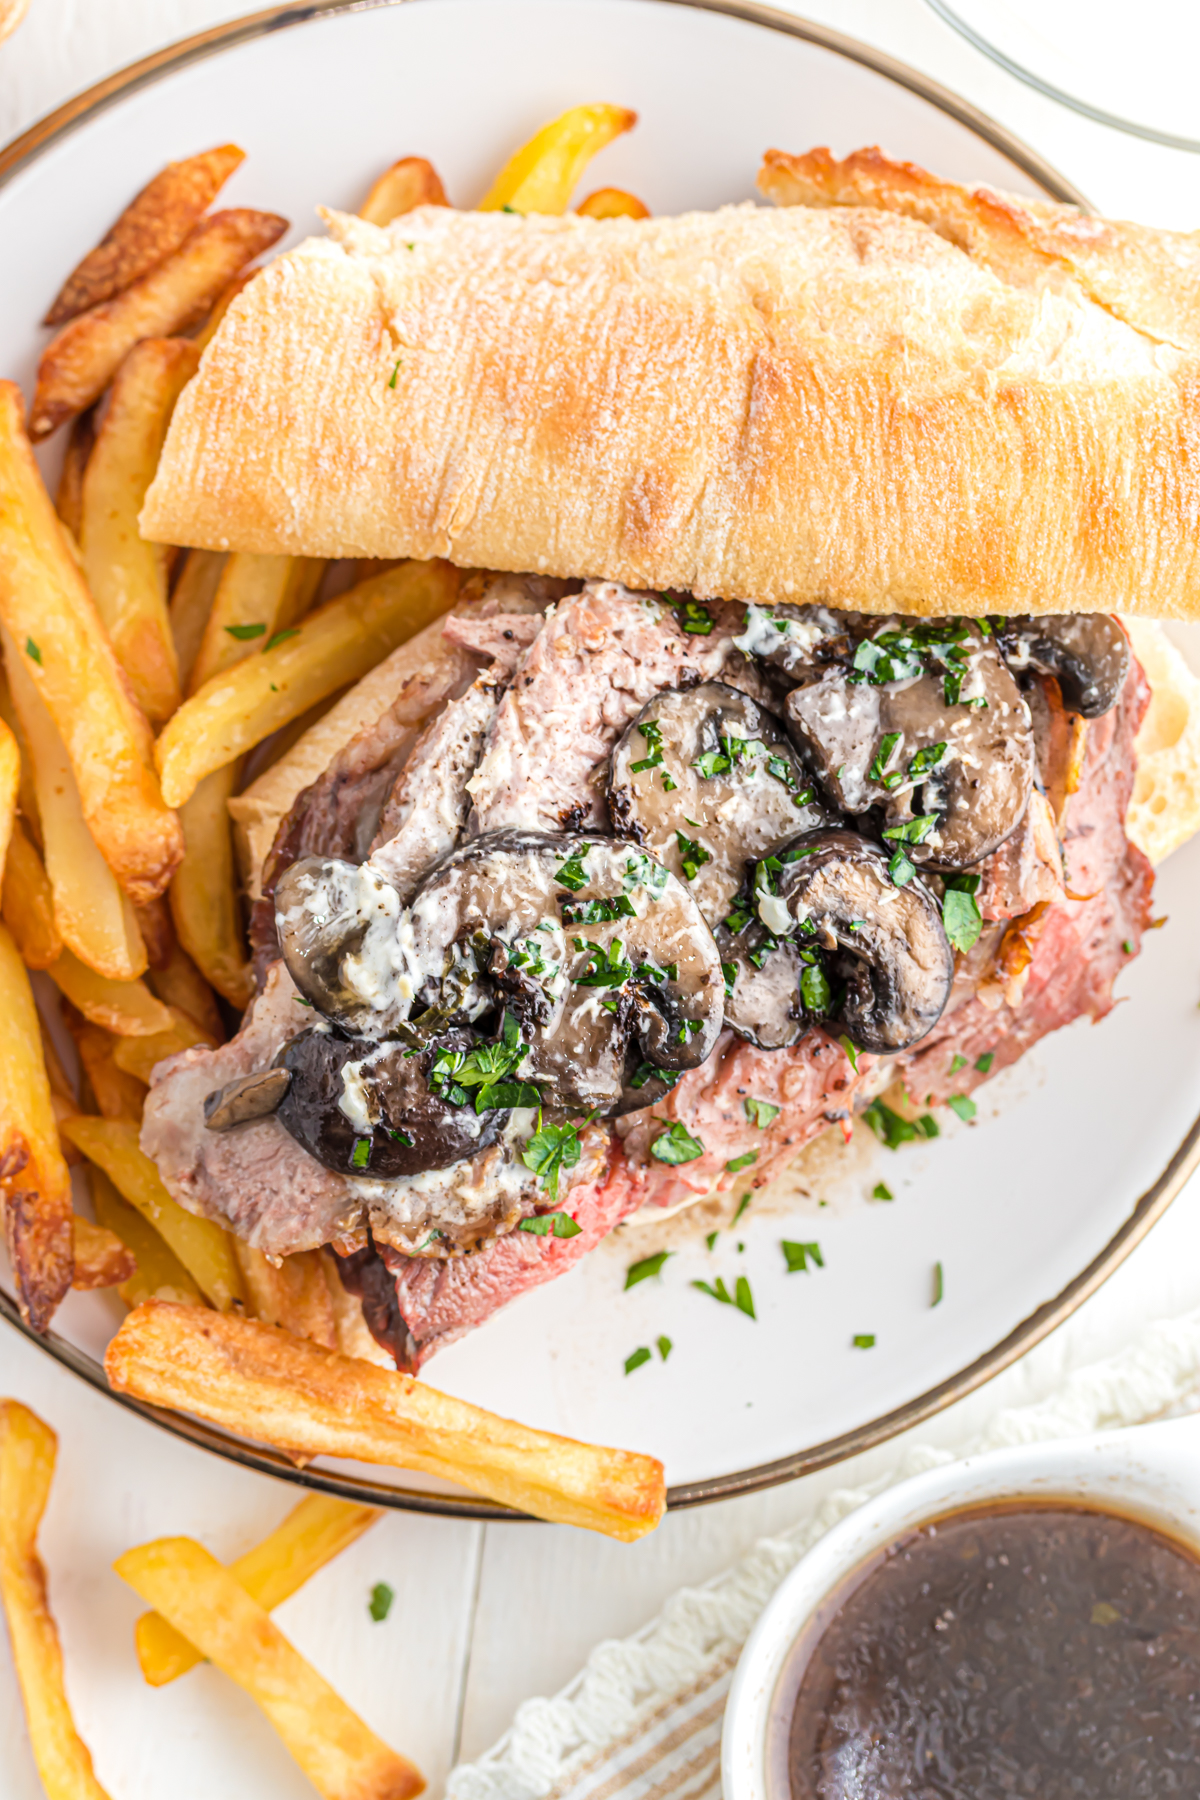 Open-faced leftover prime rib sandwich on a plate with fries.